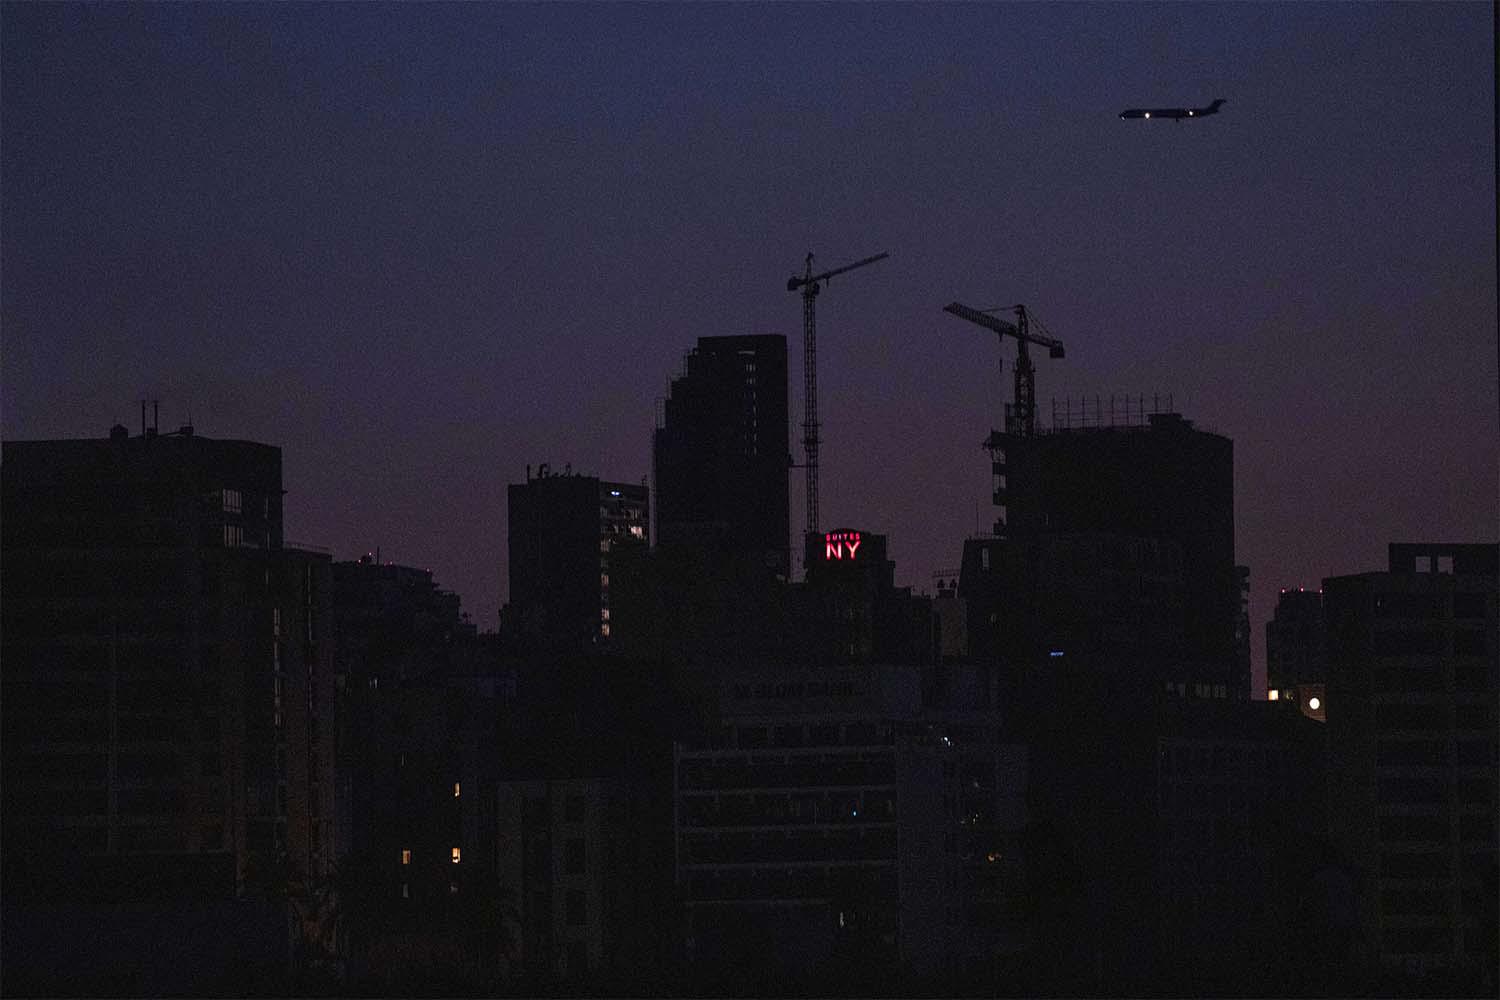 Beirut remains in darkness during a power outage